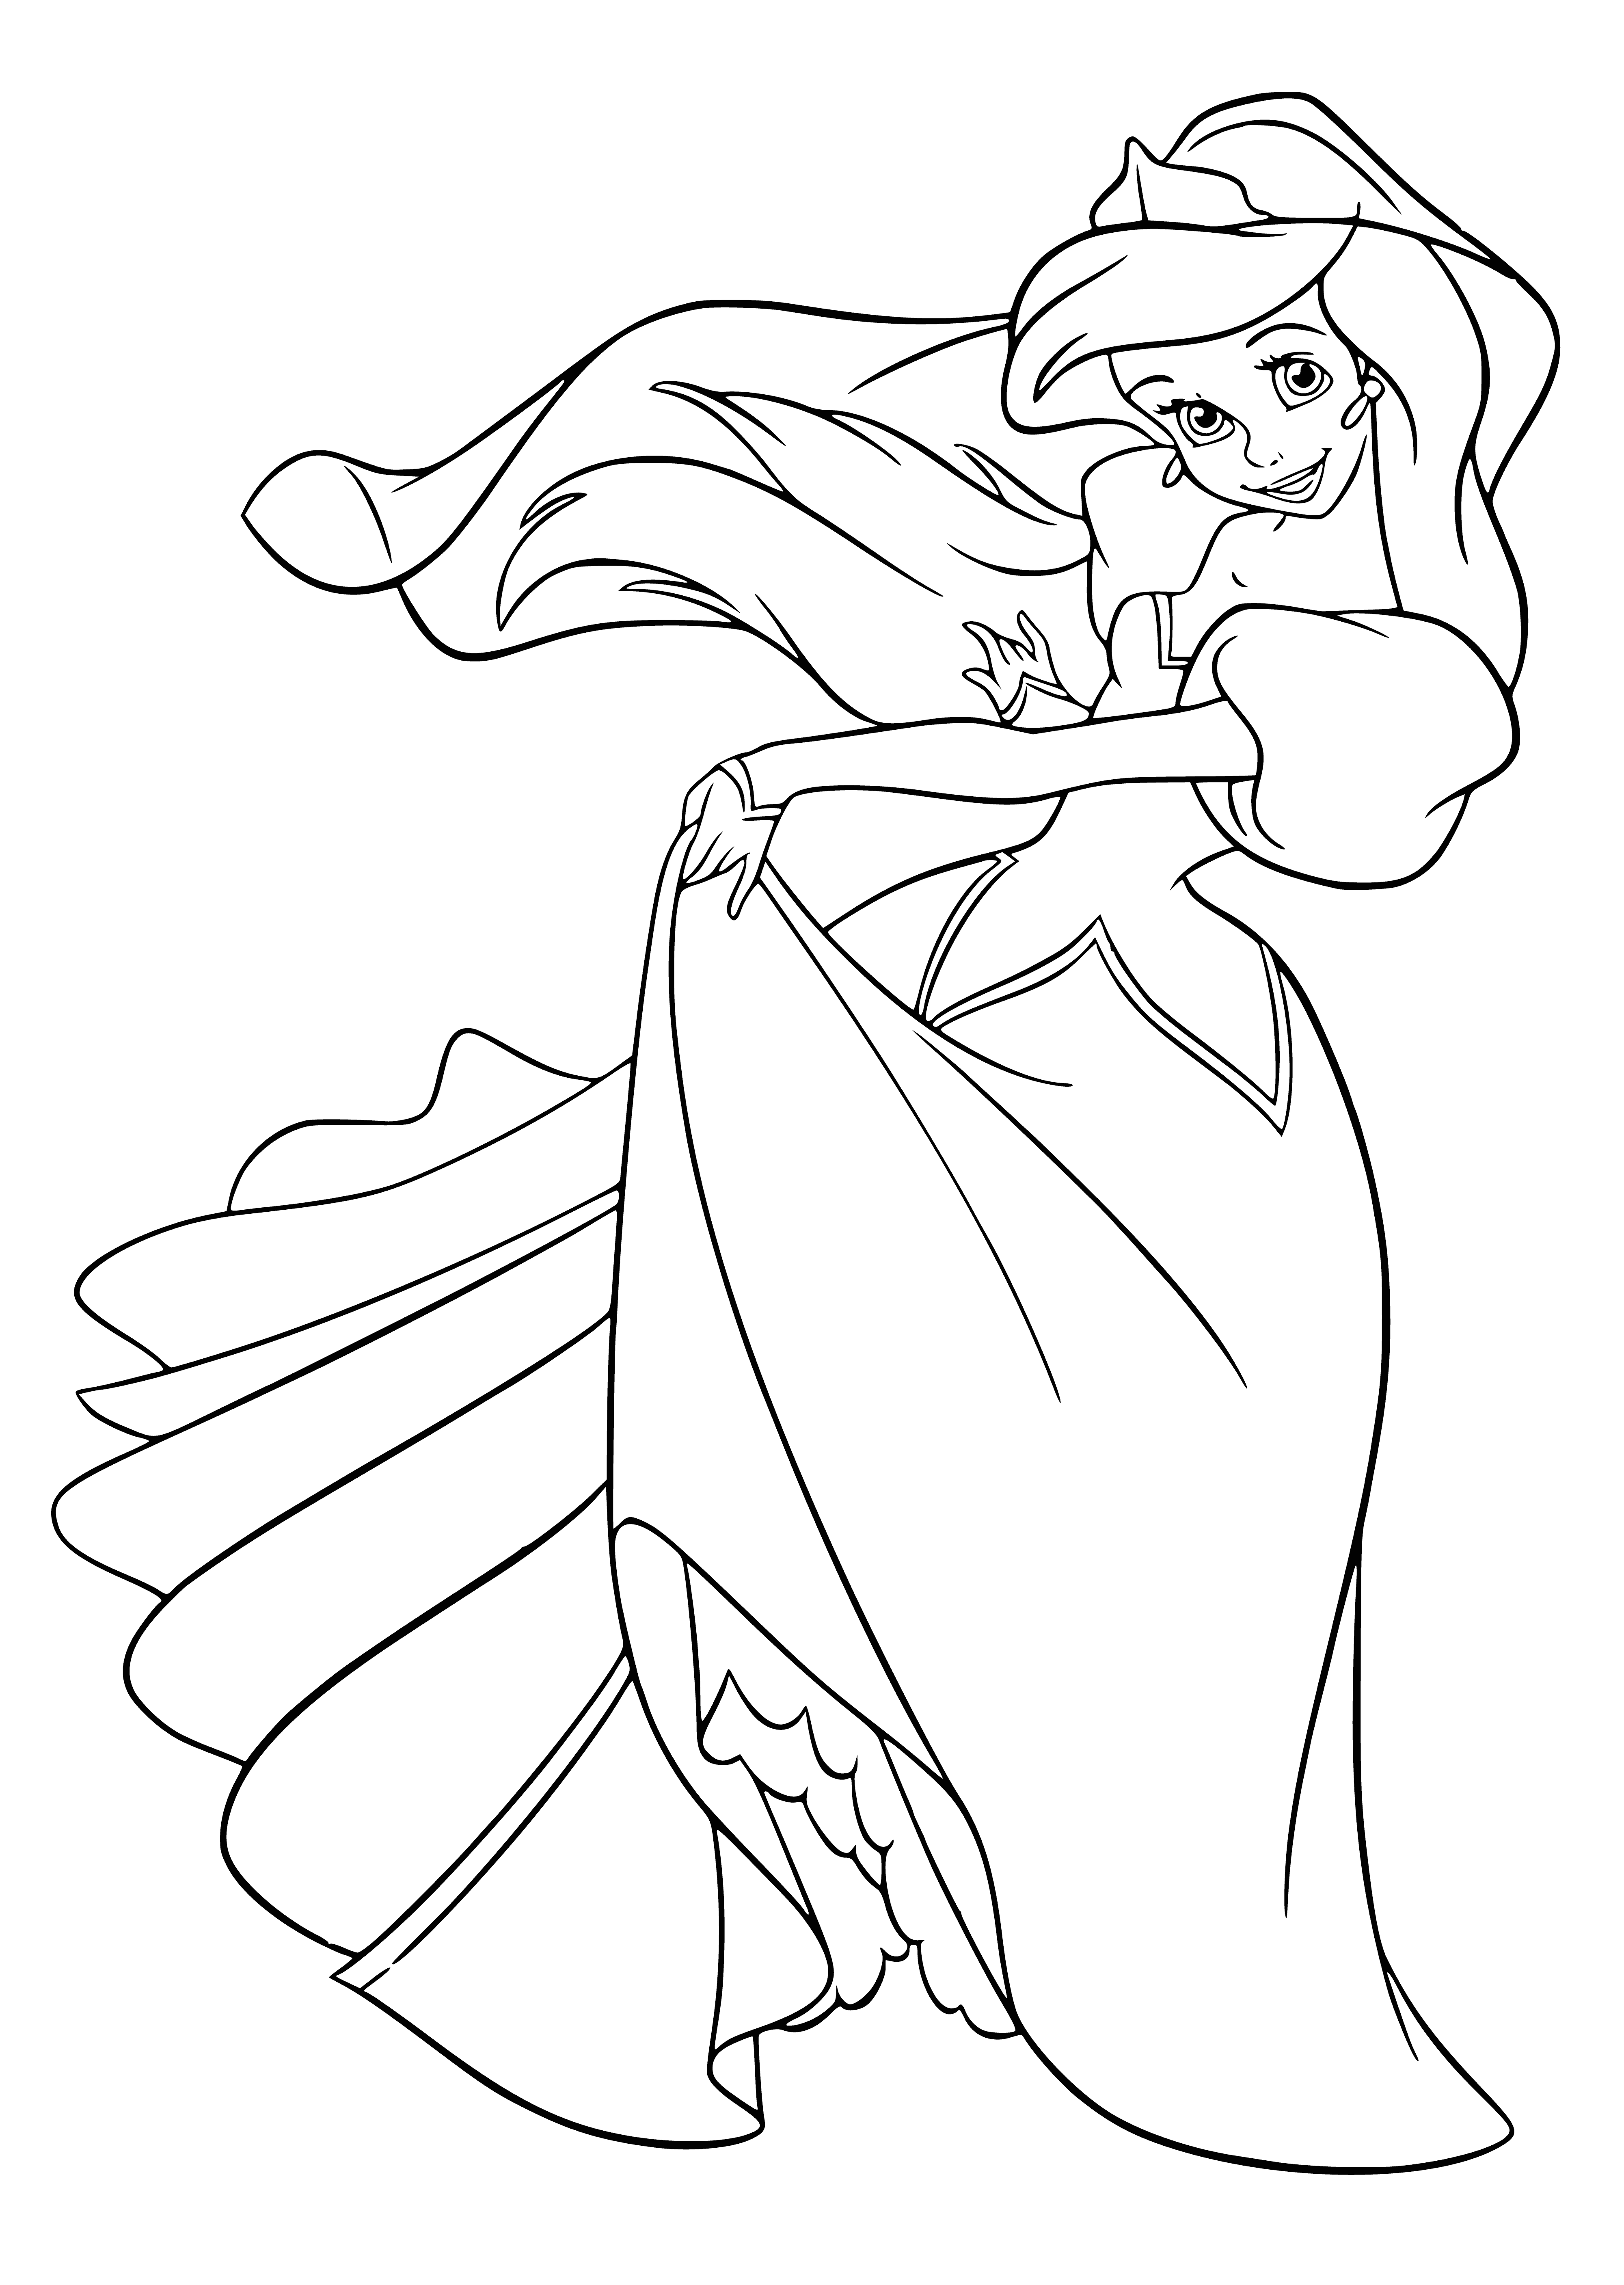 coloring page: Ariel dances on a rock, wearing a pink & purple dress with white underskirt, her red hair blowing in the wind. Behind her, a school of fish swims.